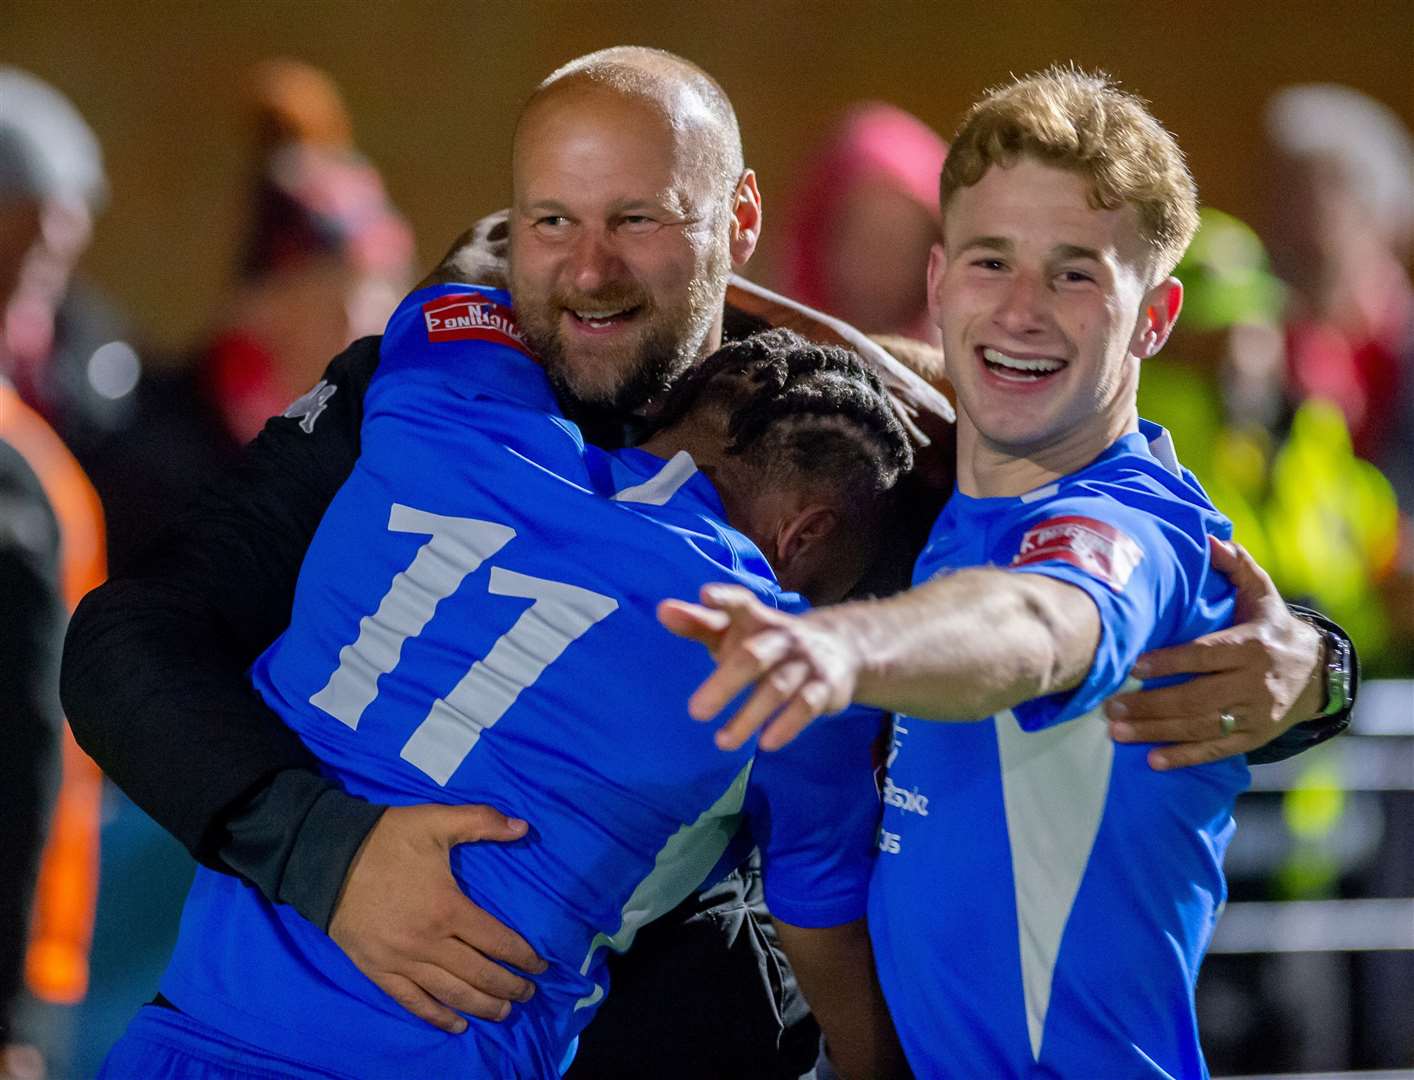 Steve Watt celebrates with Shad Ngandu and Ethan Smith after reaching last season’s play-off final. Picture: Ian Scammell